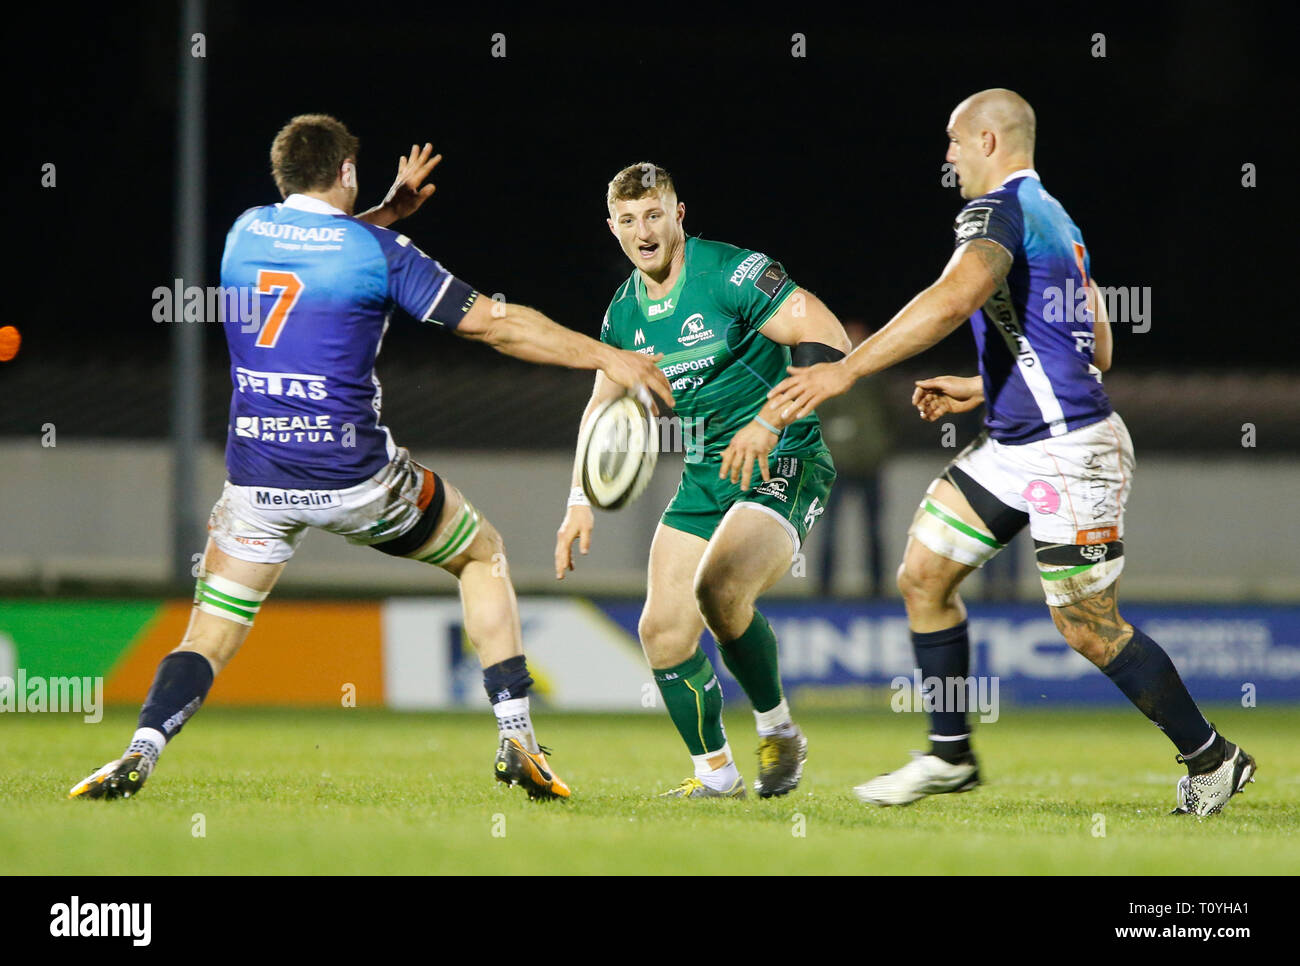 Galway Sports Ground, Galway, Ireland. 22nd Mar, 2019. Guinness Pro14  rugby, Connacht versus Benetton; Peter Robb (Connacht) plays the ball  between Giovanni Pettinelli and Marco Lazzaroni (Benetton) Credit: Action  Plus Sports/Alamy Live